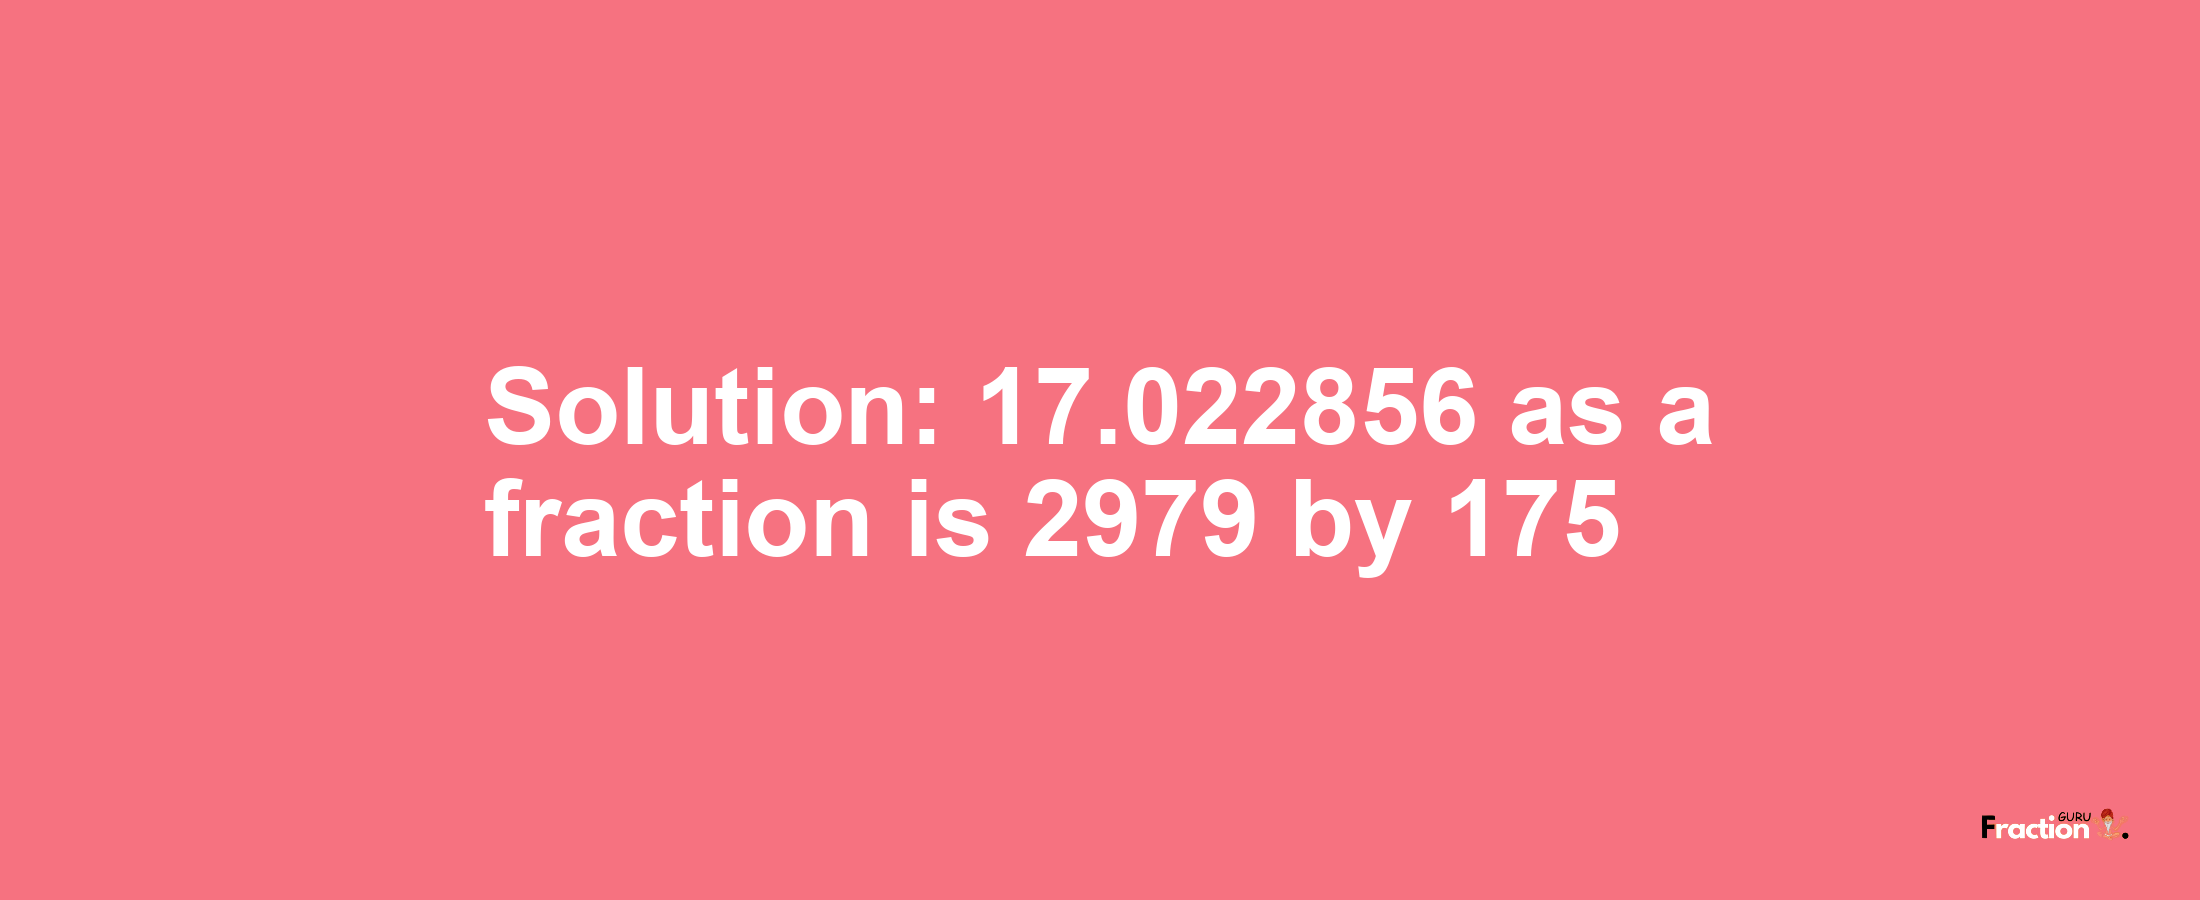 Solution:17.022856 as a fraction is 2979/175